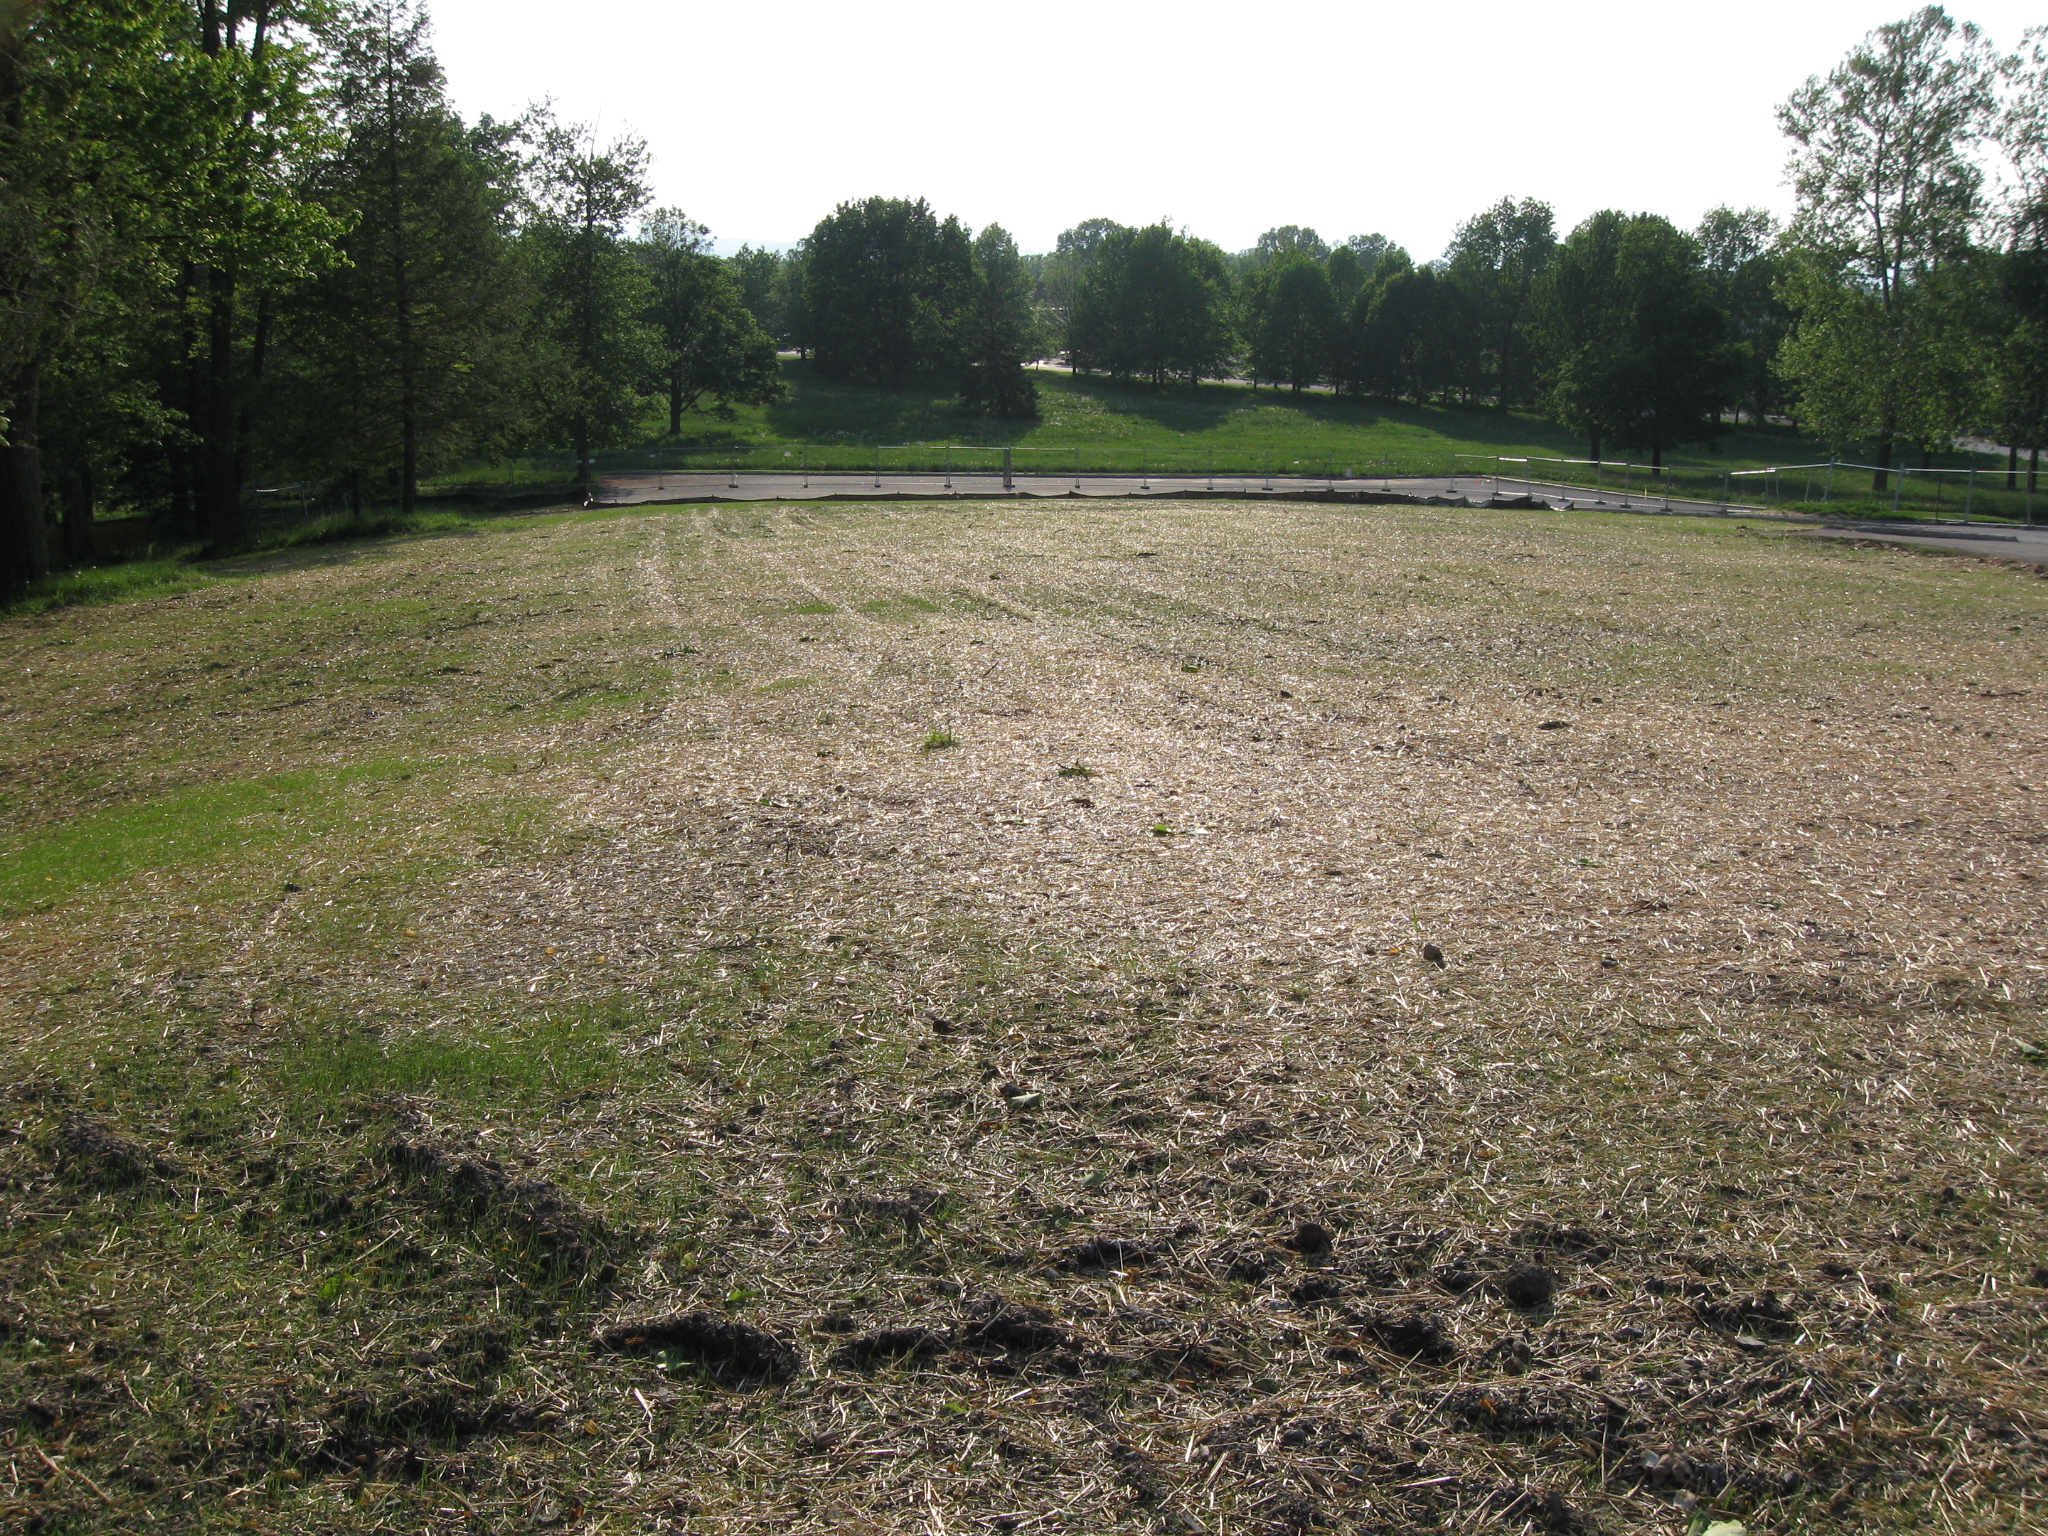 Old NPS Visitor Center Update, Grass Arrives | Gettysburg Daily